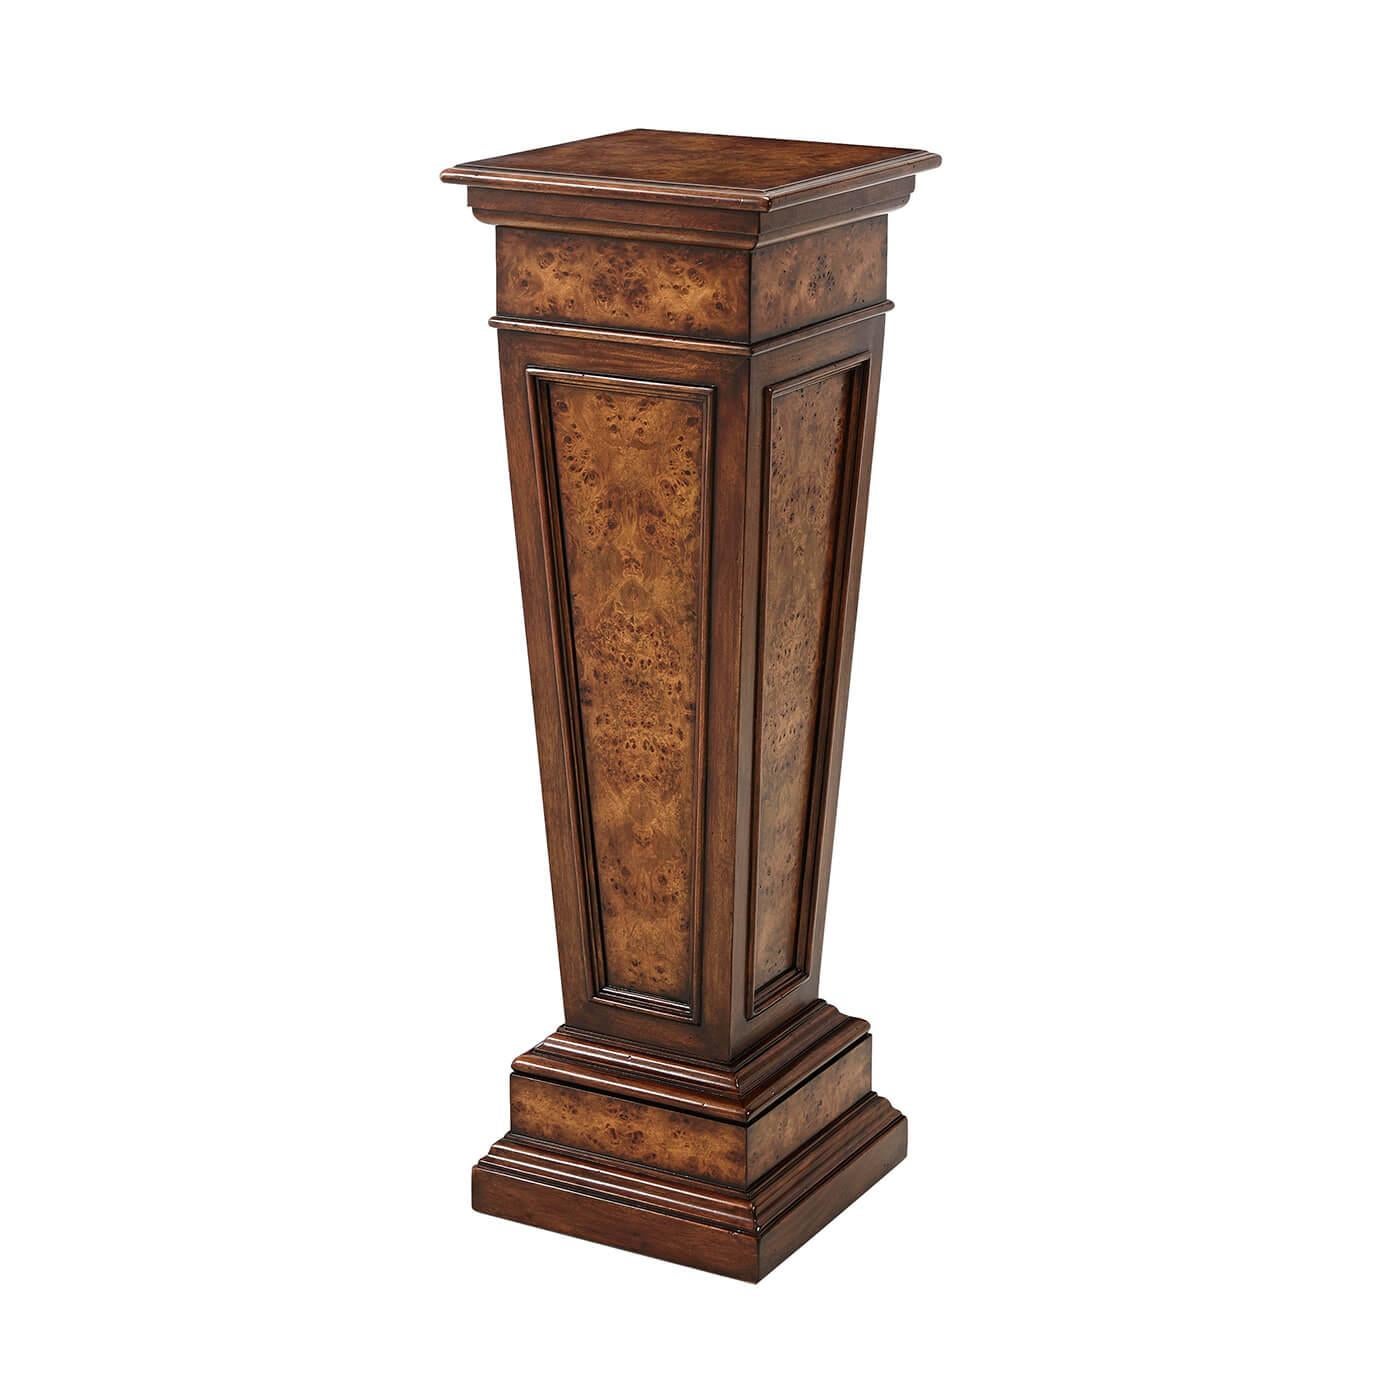 A Classical poplar burl panel tapered pedestal, with a square top and a stepped plinth base. The original Louis XVI.

Dimensions: 14